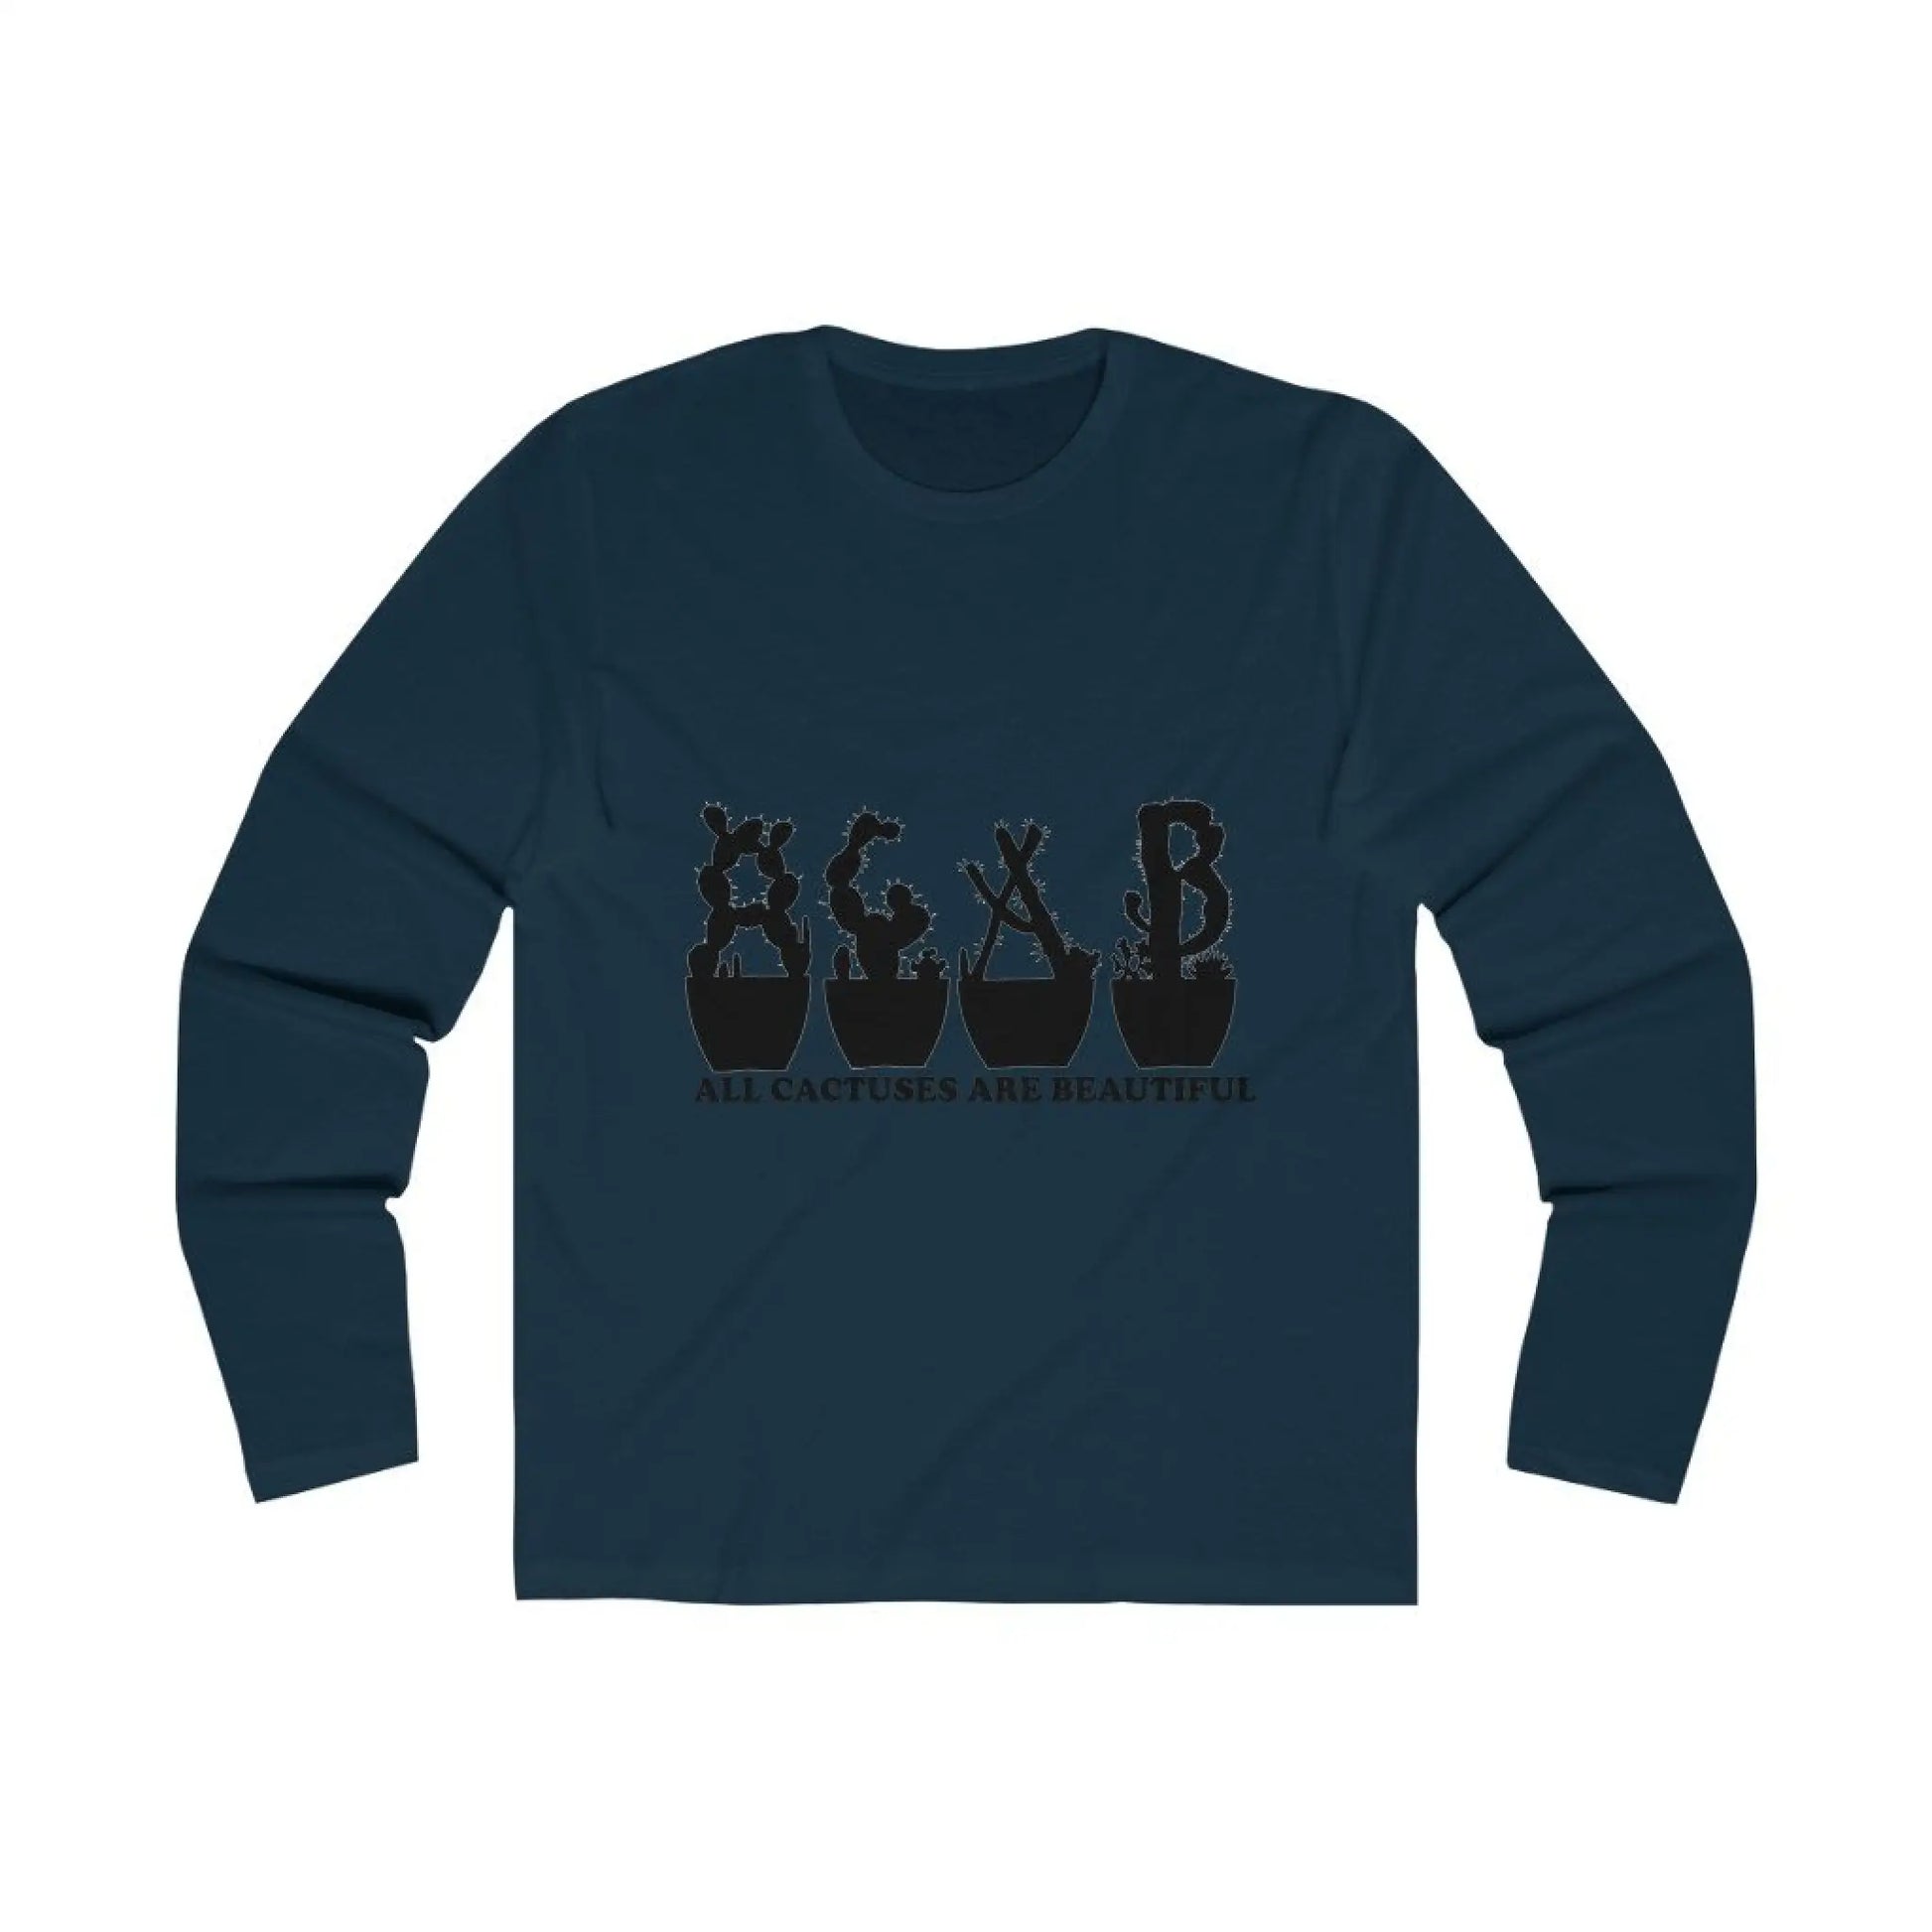 Men’s Long Sleeve Crew Tee - All Cactuses are Beautiful -